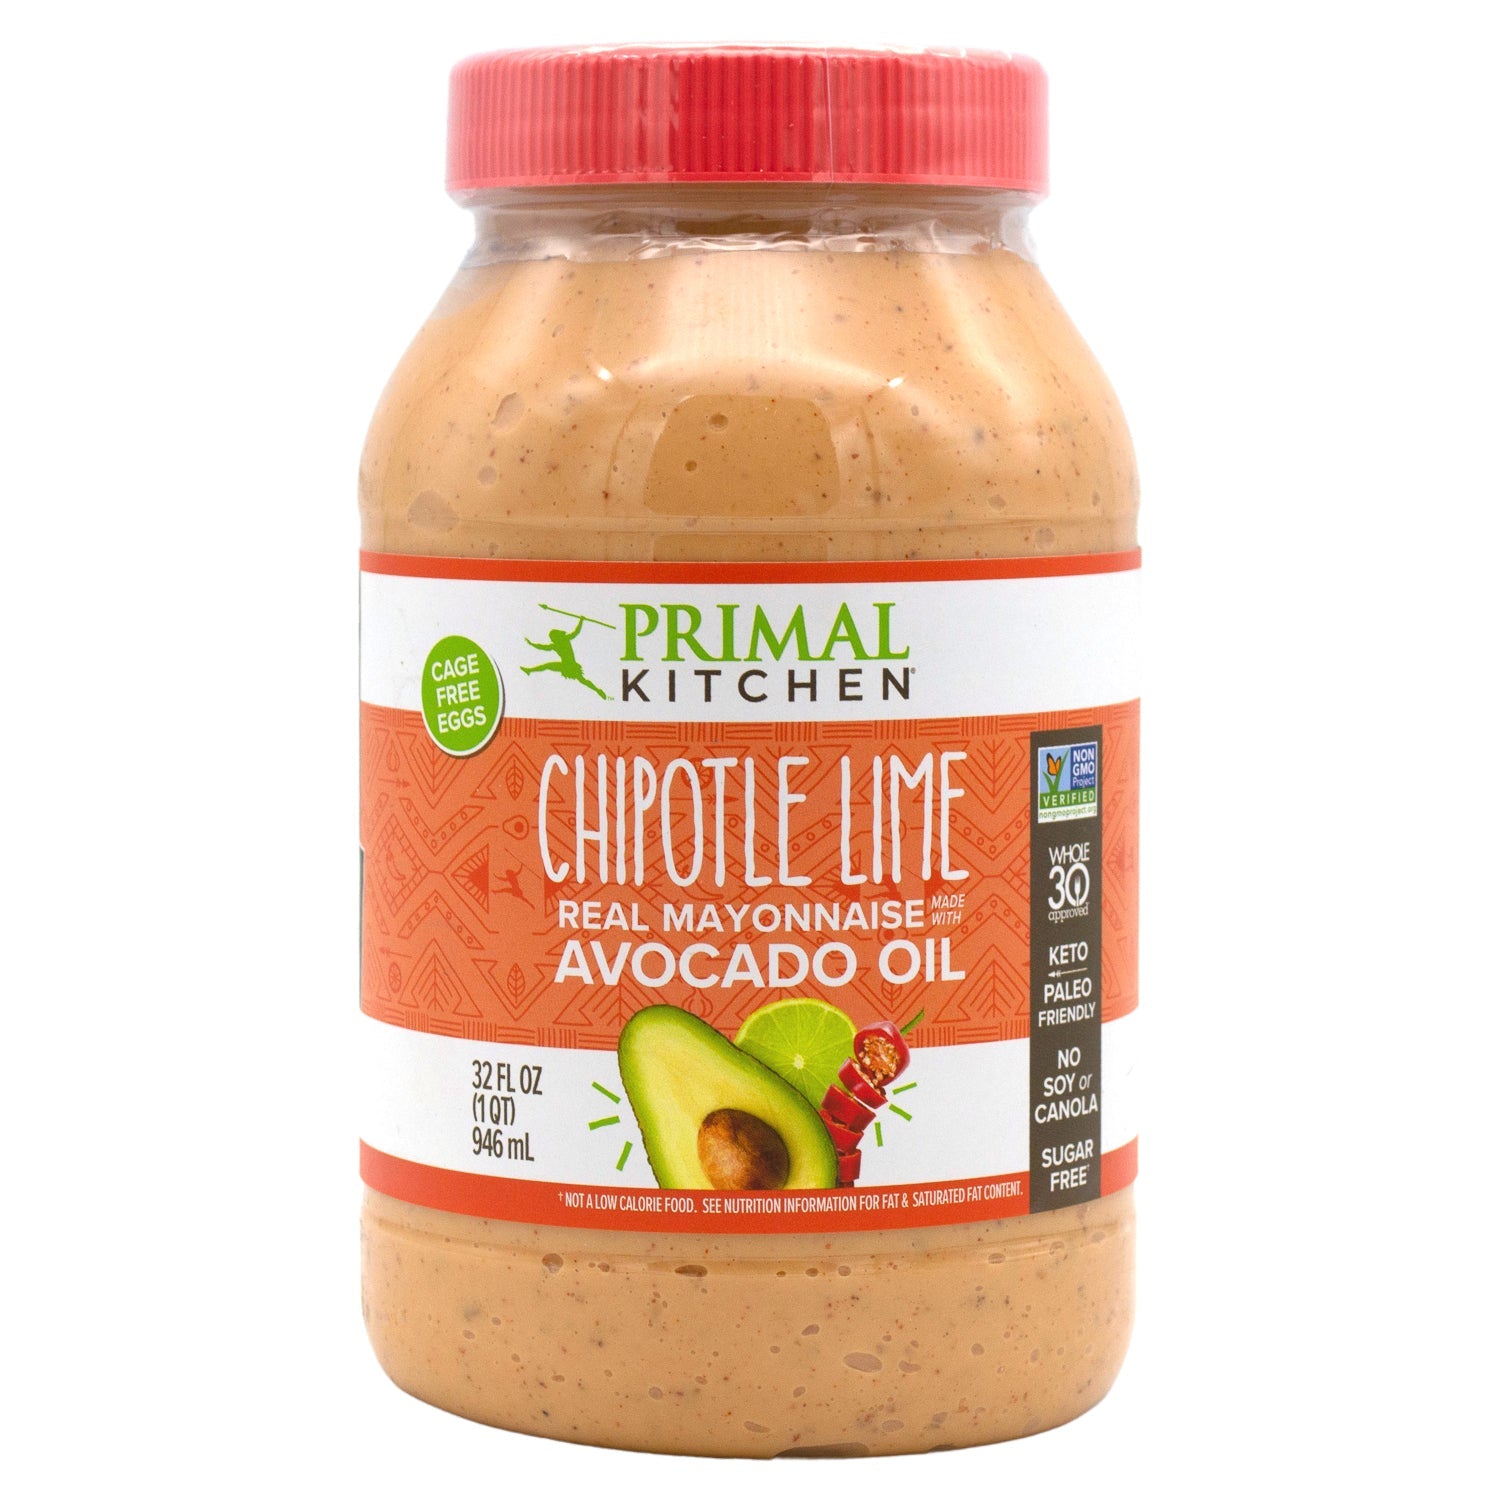 Primal Kitchen Mayo with Avocado Oil Primal Kitchen 32 Fluid Ounce Chipotle Lime 